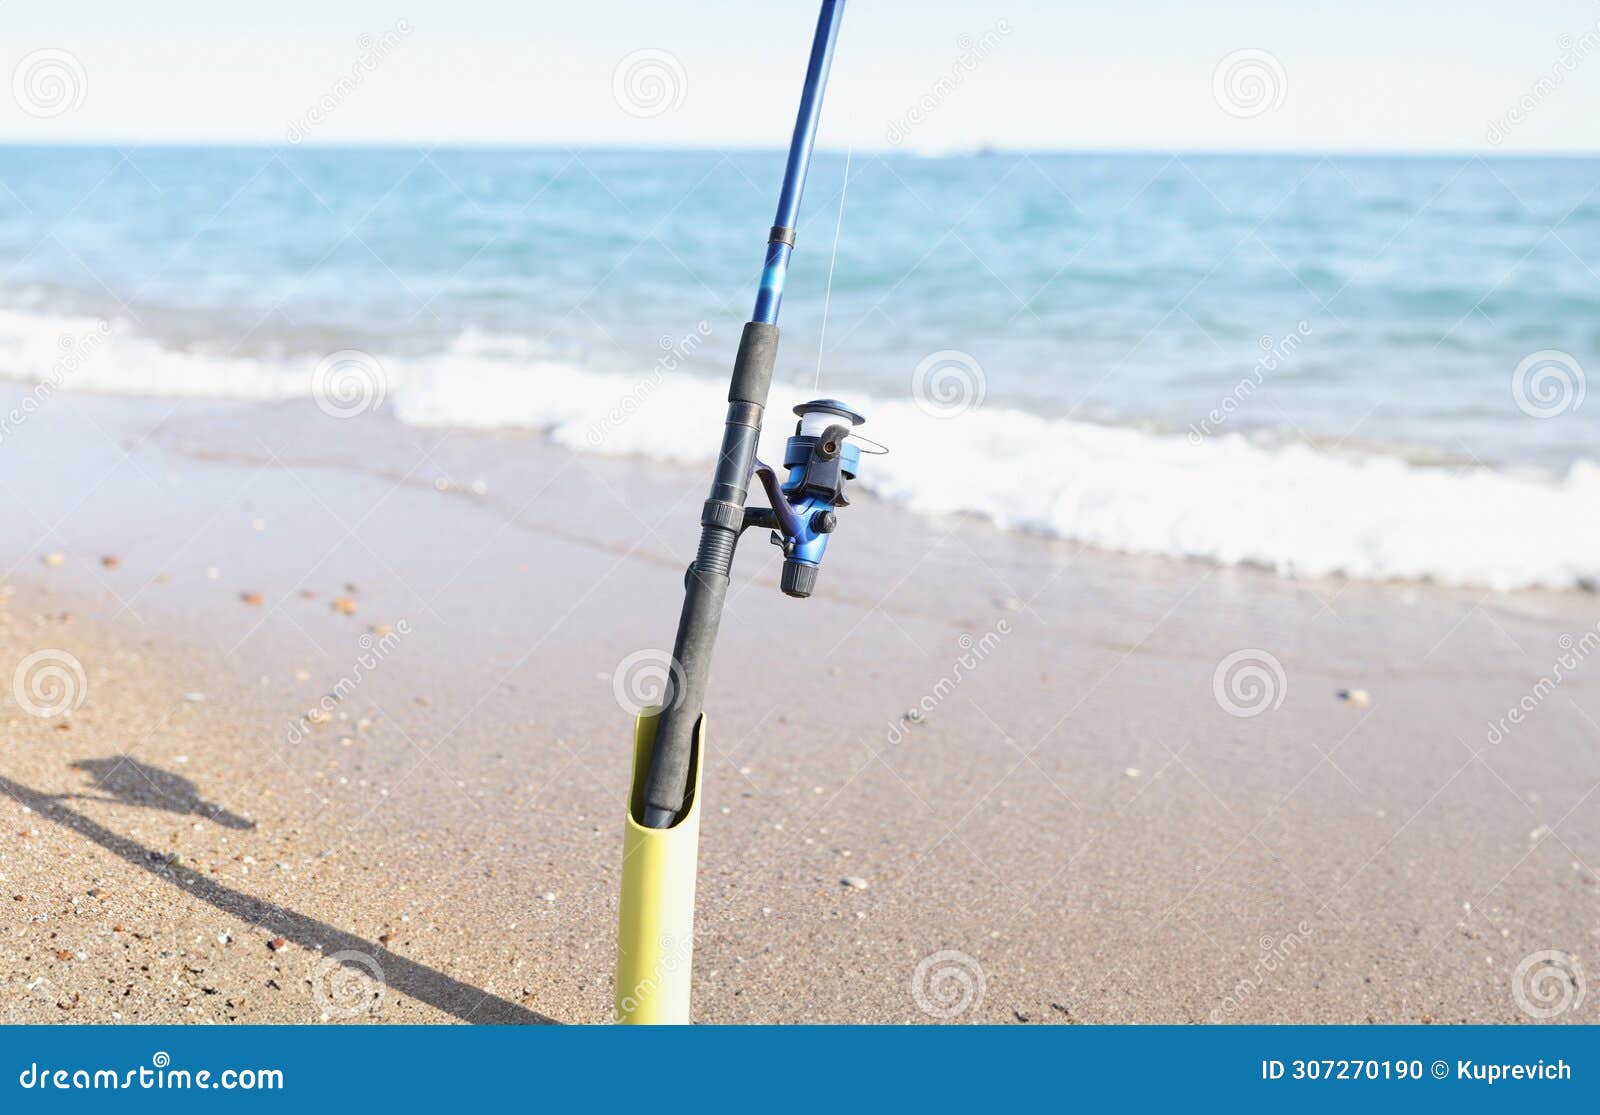 The Fishing Rod Stands on the Sand on the Seashore, Blurry Stock Photo -  Image of pond, water: 307270190